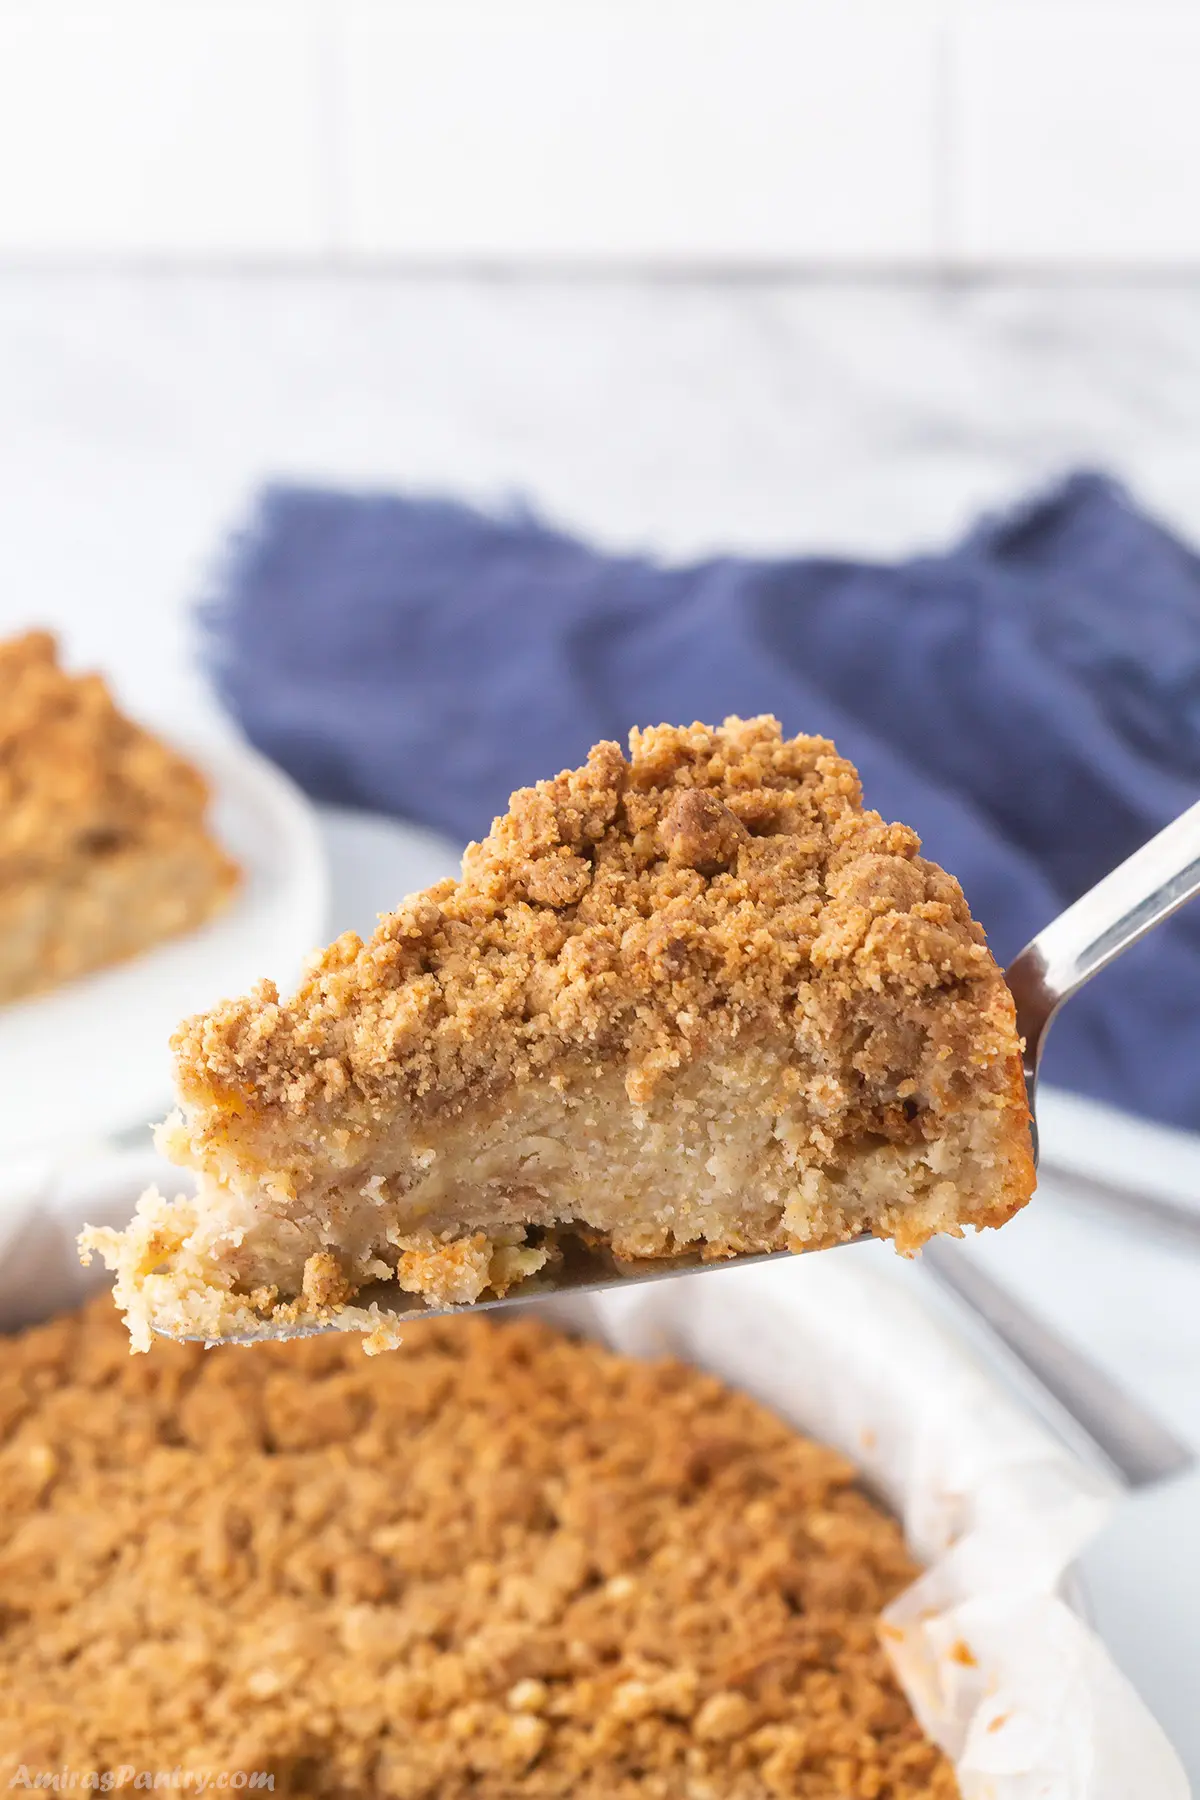 A close up look at a slice of apple crumb cake.